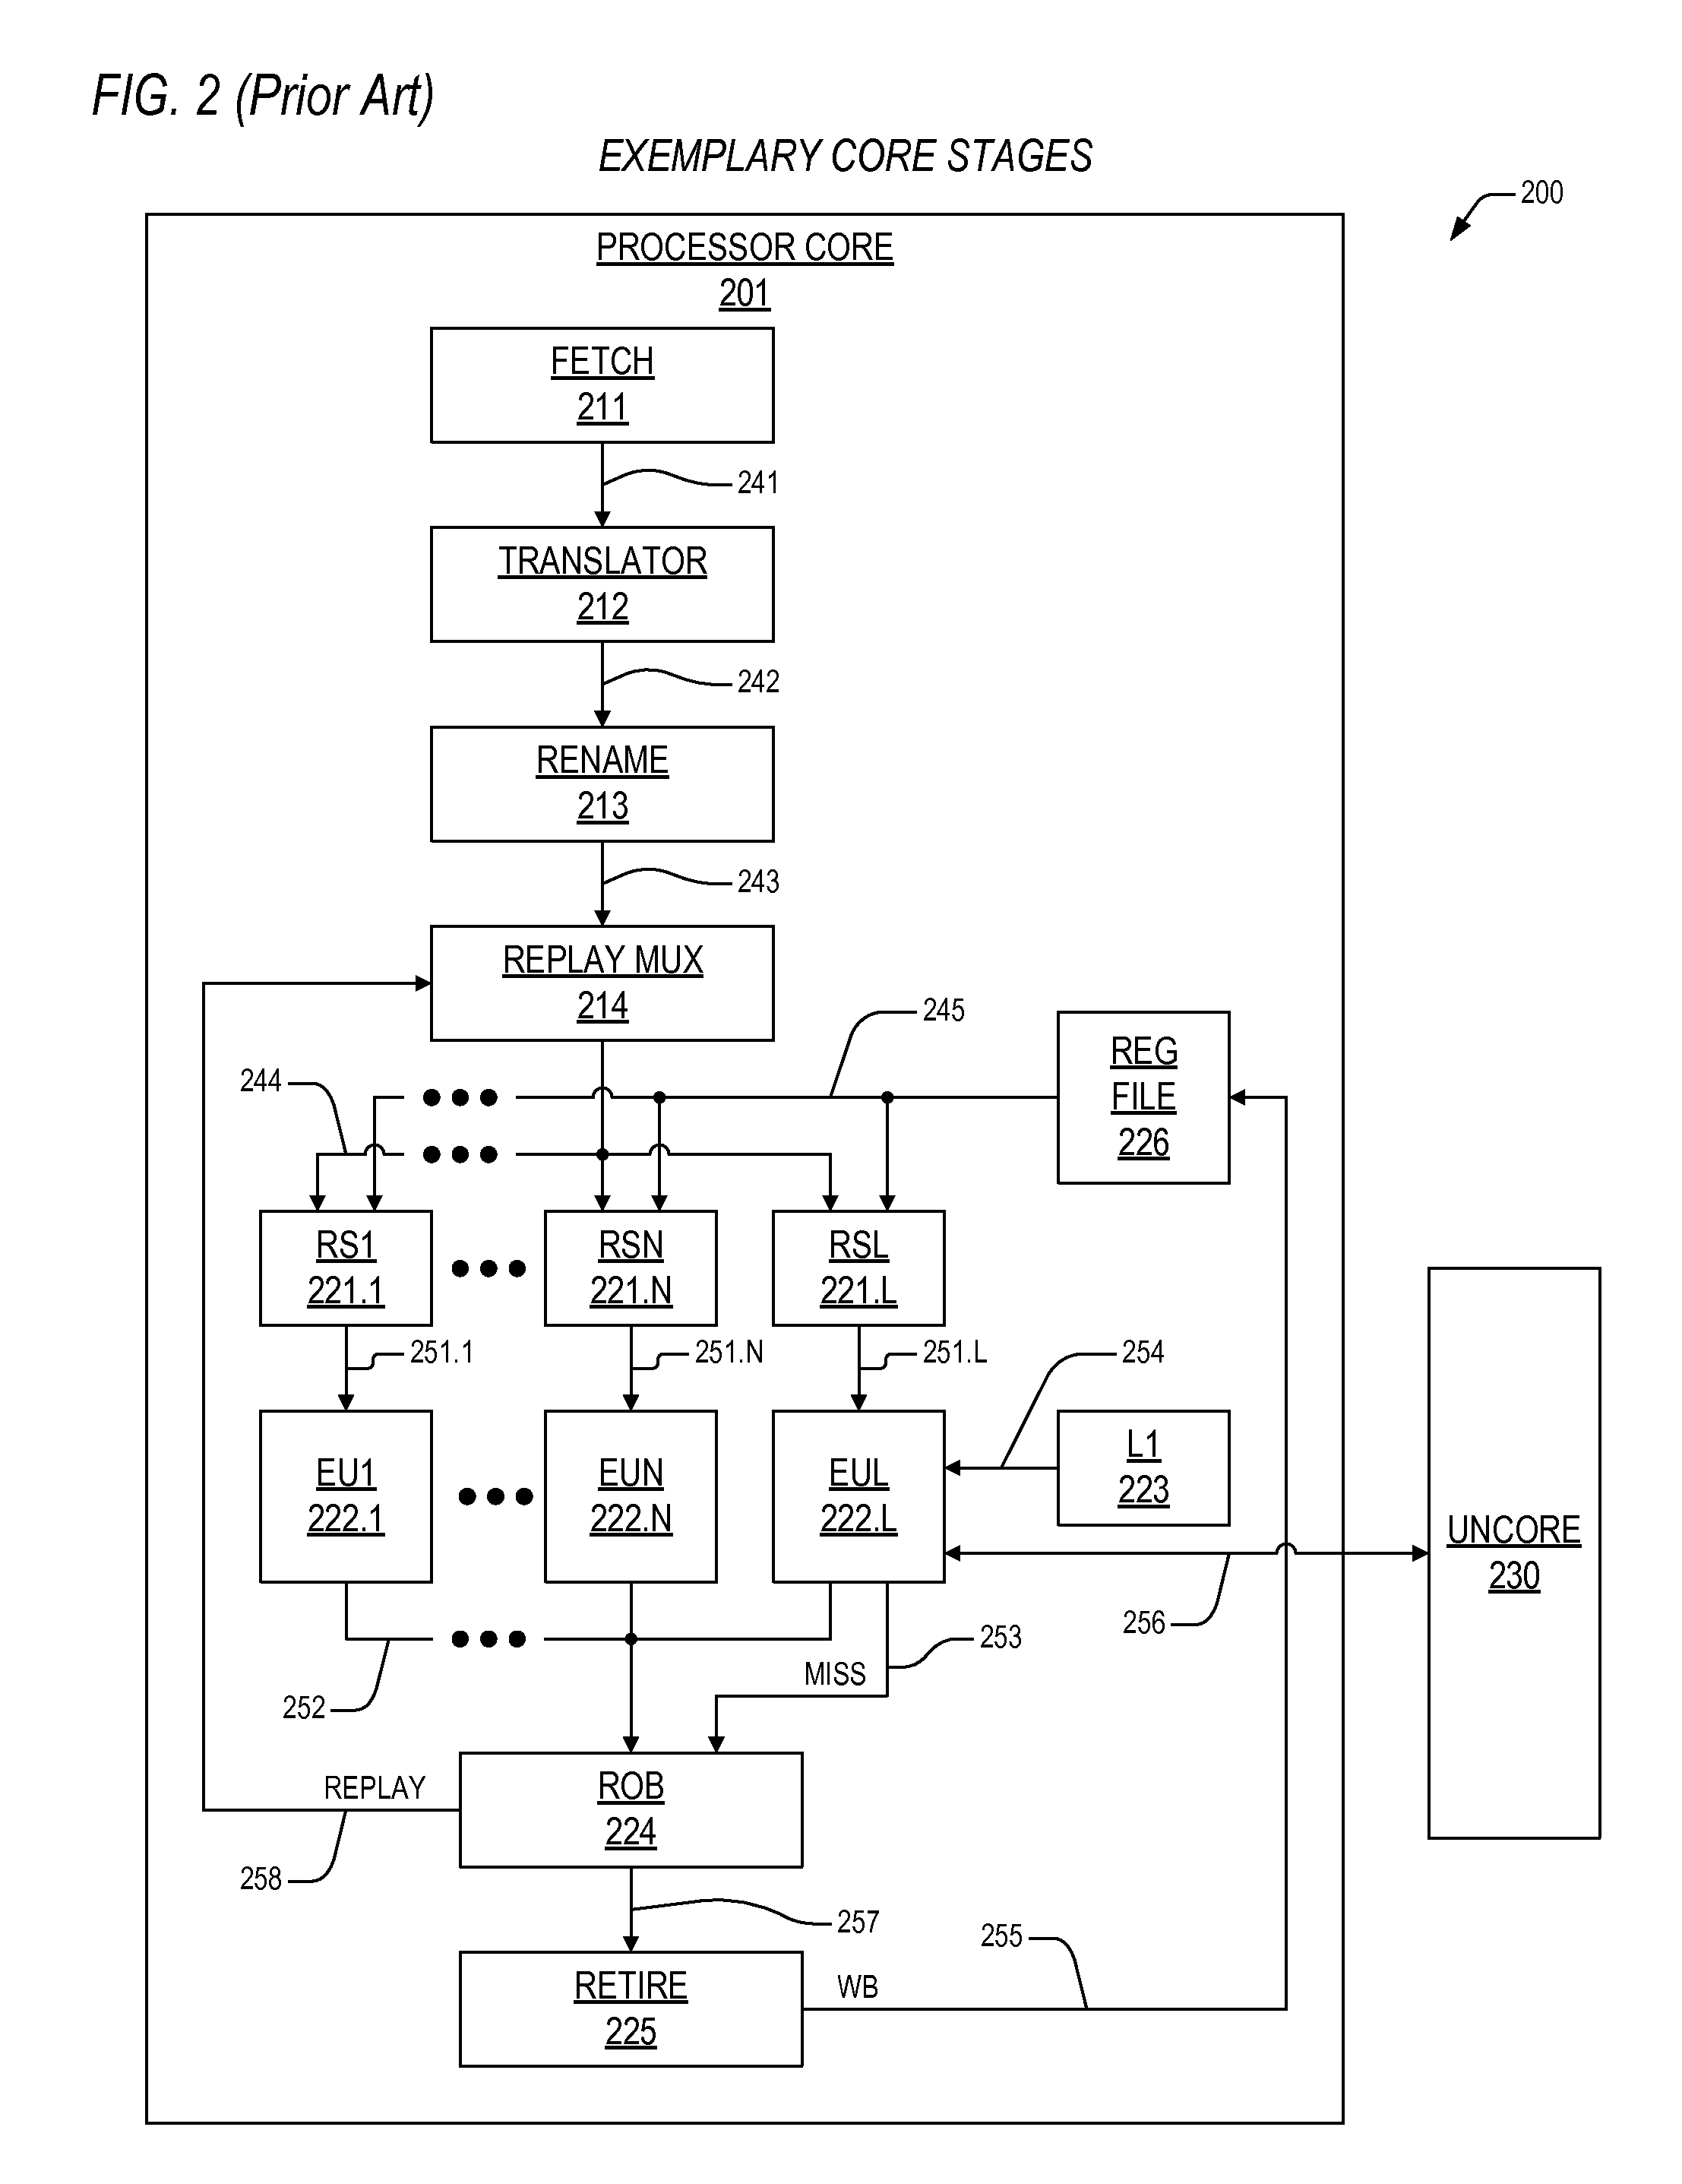 Apparatus and method to preclude non-core cache-dependent load replays in an out-of-order processor